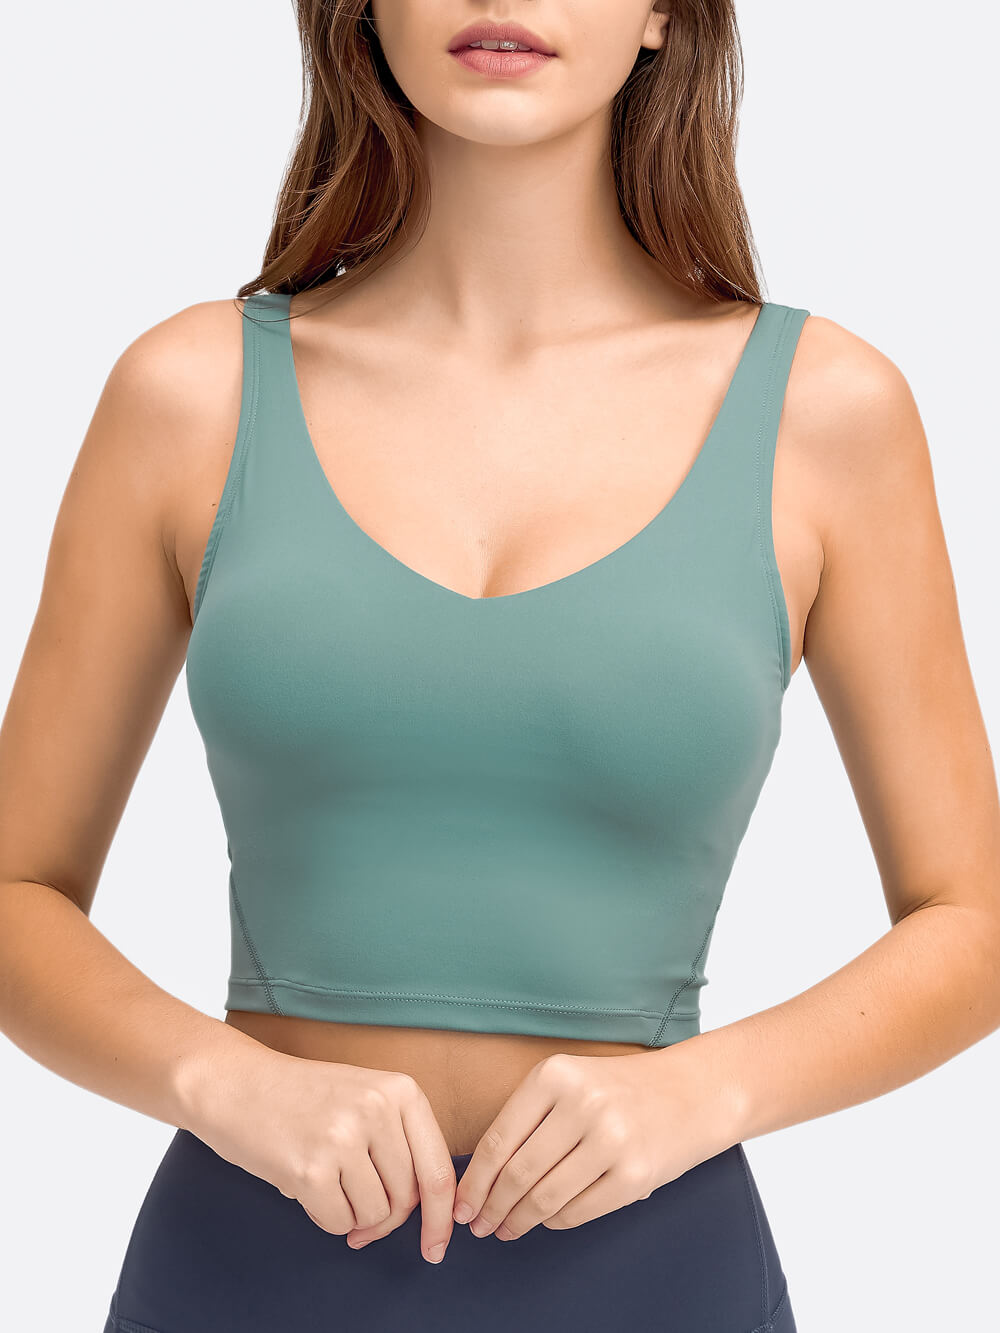 Ukaste Women's Studio Essential Y-Back Workout Bra Top - Longline Padded  Camisole Crop Tank Tops with Built-in Bra (Blue Green, 4) at  Women's  Clothing store